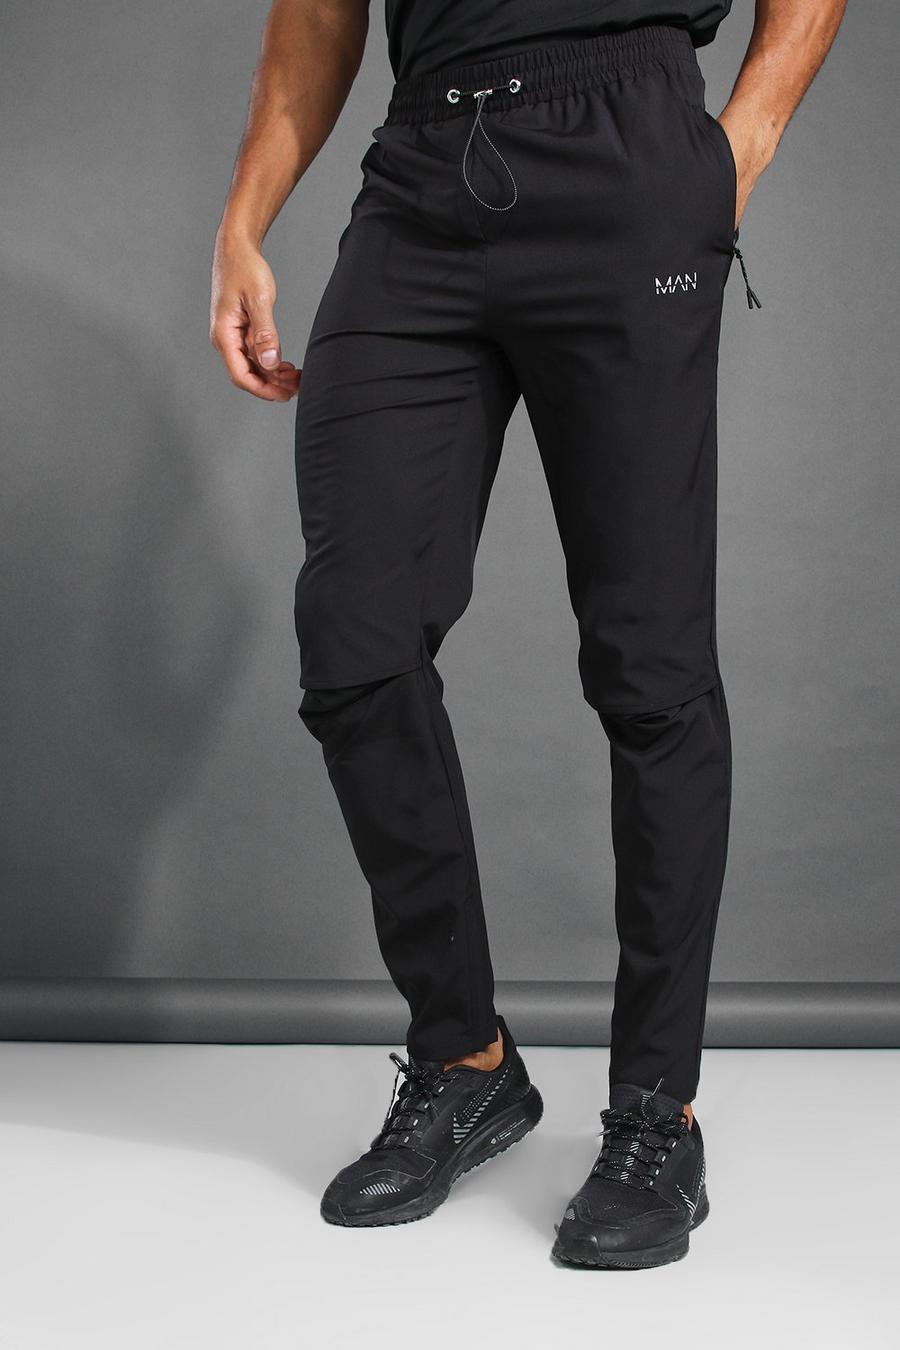 Black negro Man Active Gym Tapered Fit Jogger